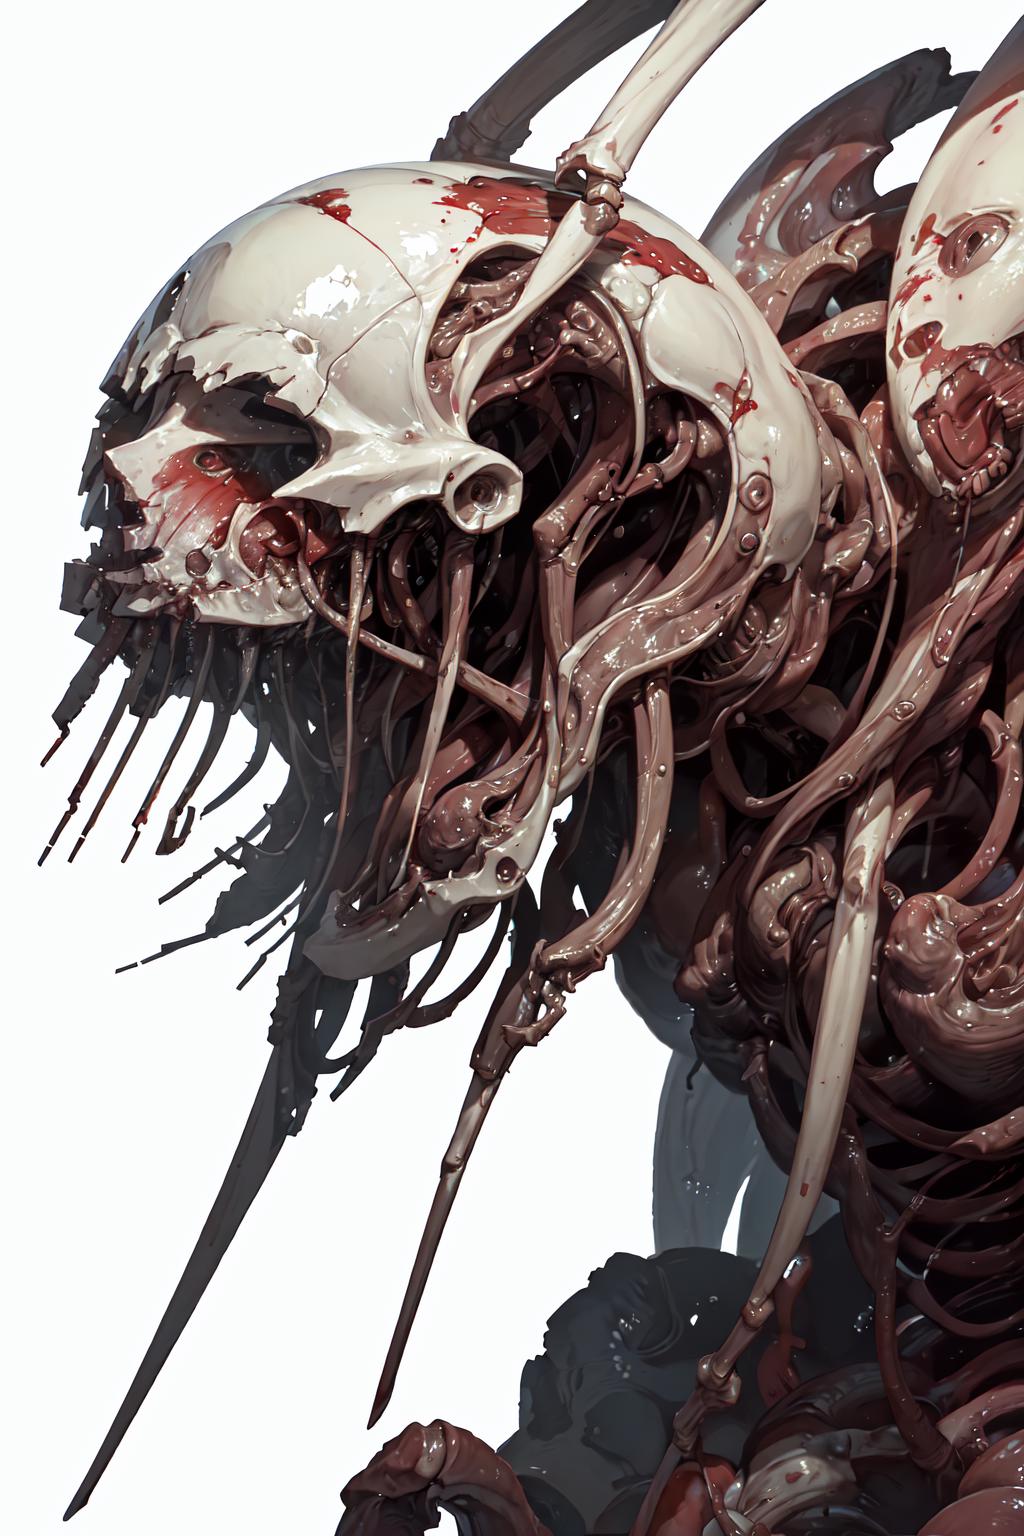 Body Horror Creatures image by Reelai